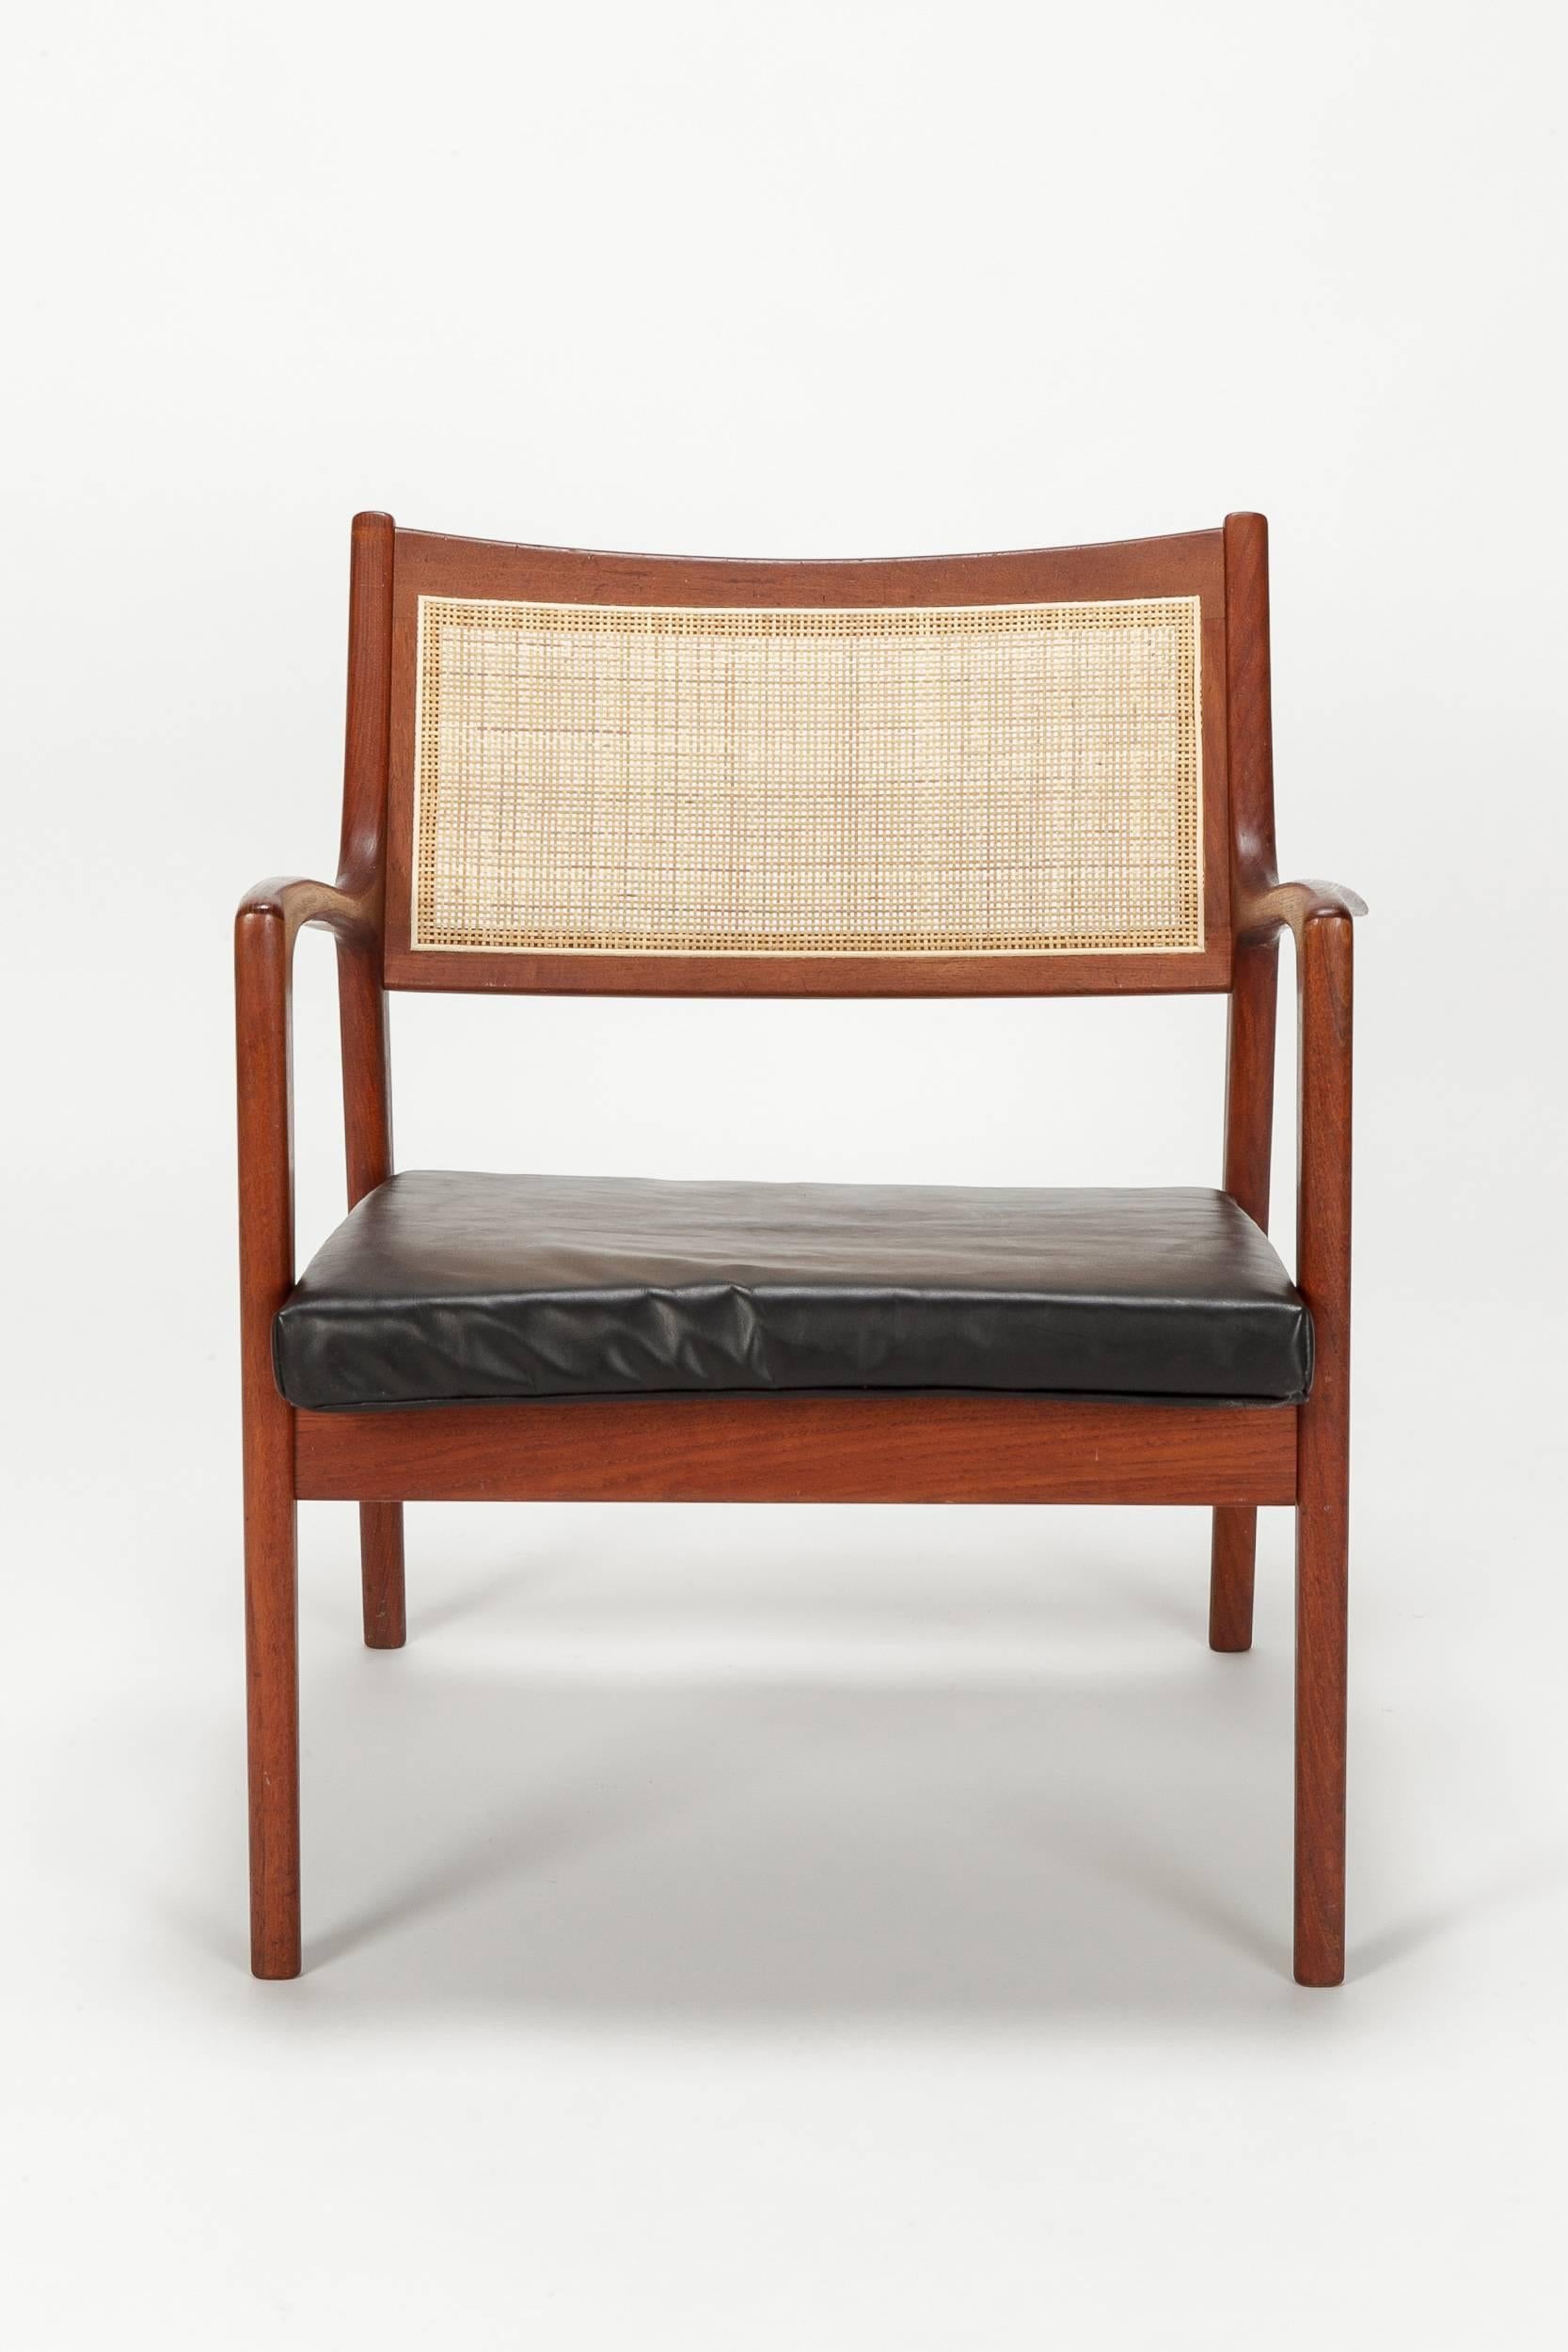 Wonderful Karl Erik Ekselius chair model F139 designed in 1955 and manufactured by JOC Vetlanda in Sweden. The frame is made of solid teak, organically shaped armrests, woven cane backrest and a new covered leather seat cushion. The cane webbing was